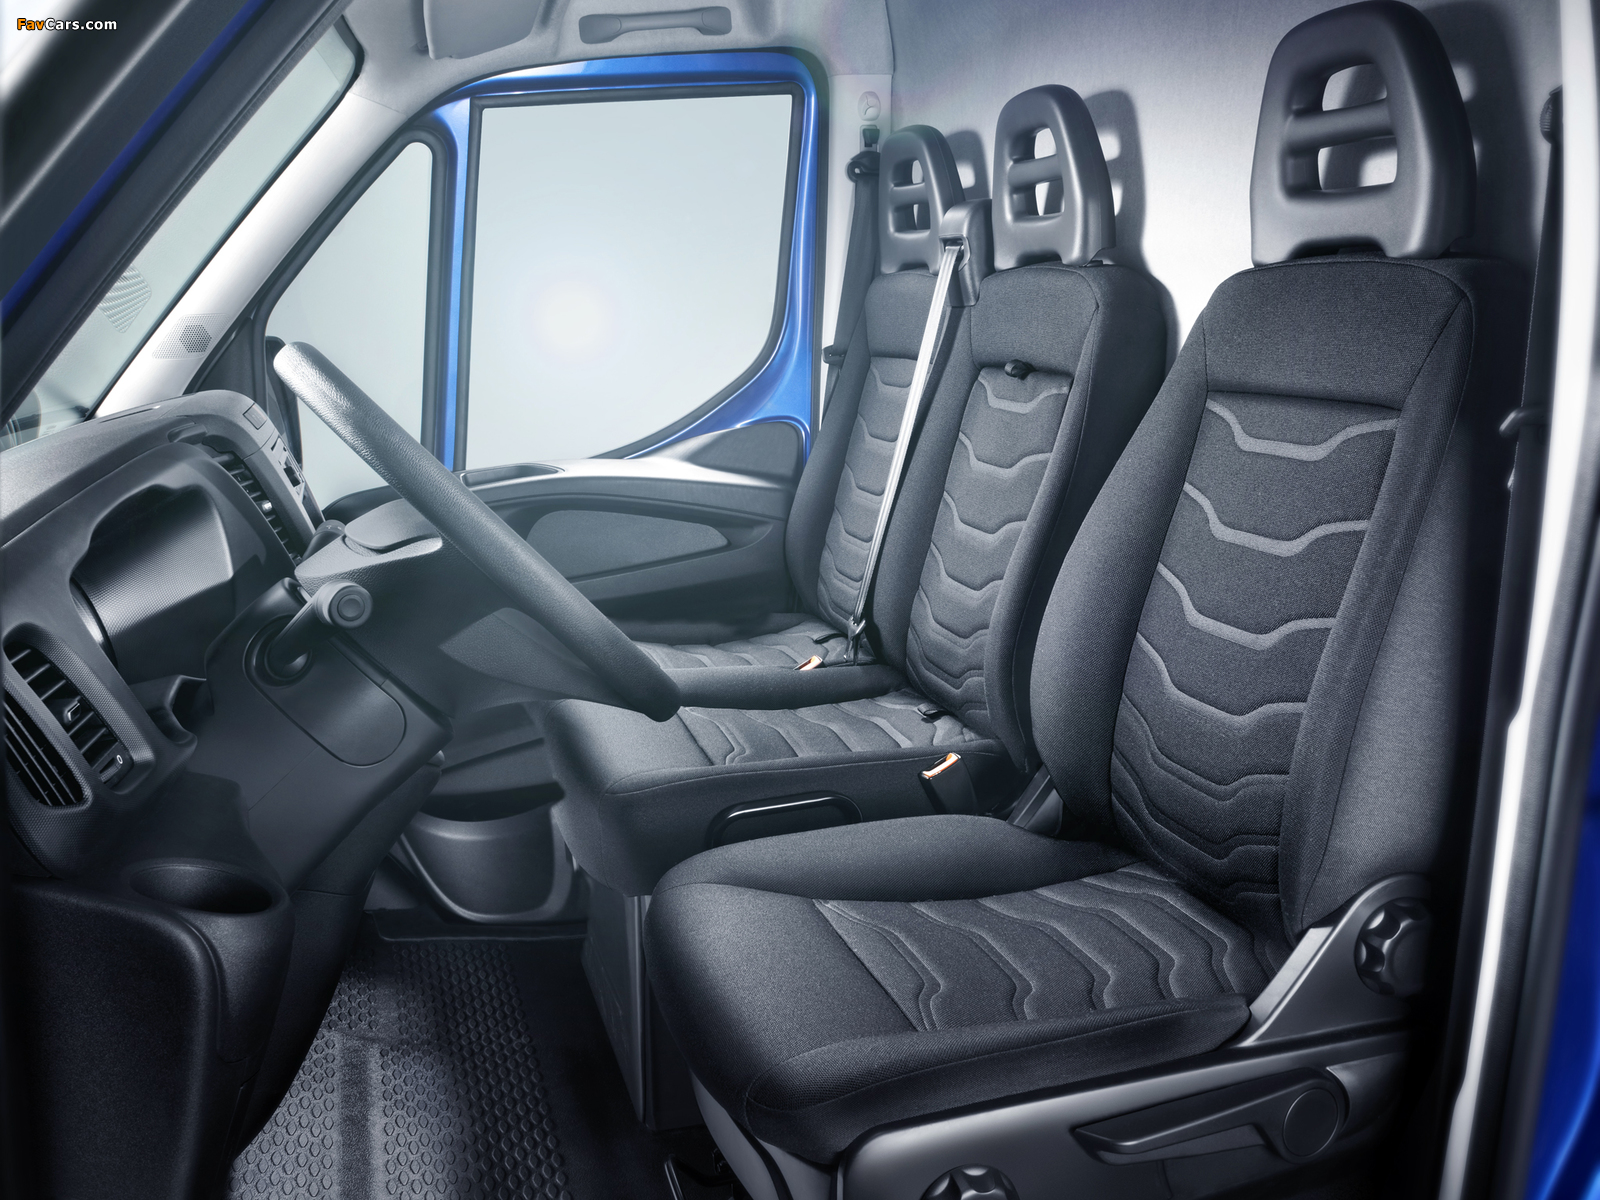 Pictures of Iveco Daily Van 2014 (1600 x 1200)